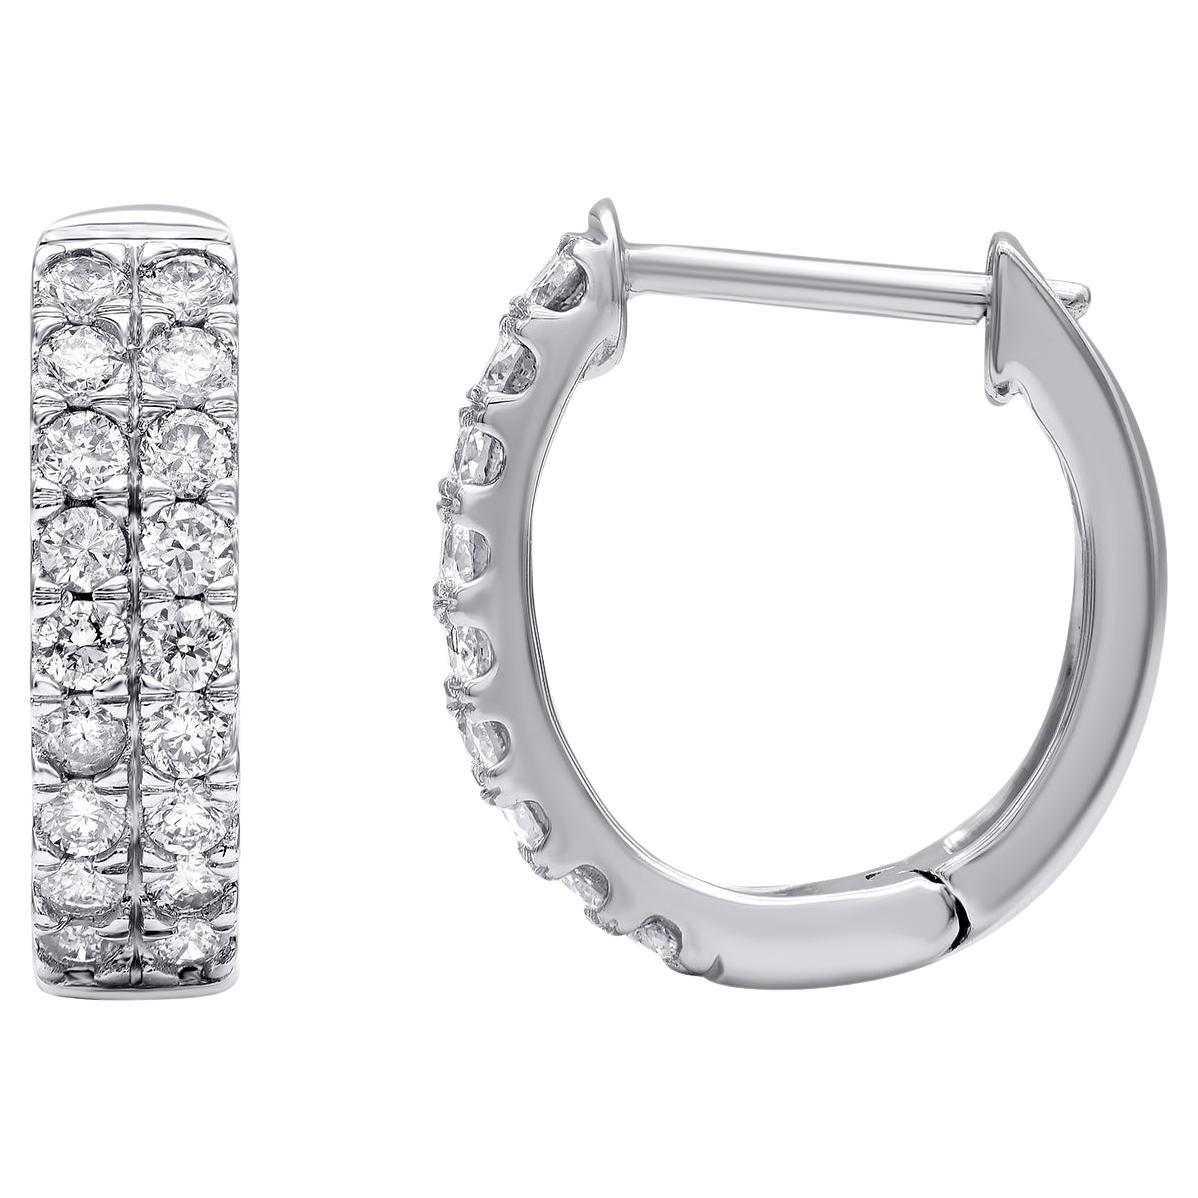 Classic and stylish diamond studded hoop earrings! perfect for daily wear. Crafted in 14 Karat white gold with 36 brilliant cut diamond in prong setting. These earring secure with hinged backs. The white diamonds are graded as H-I color and I2